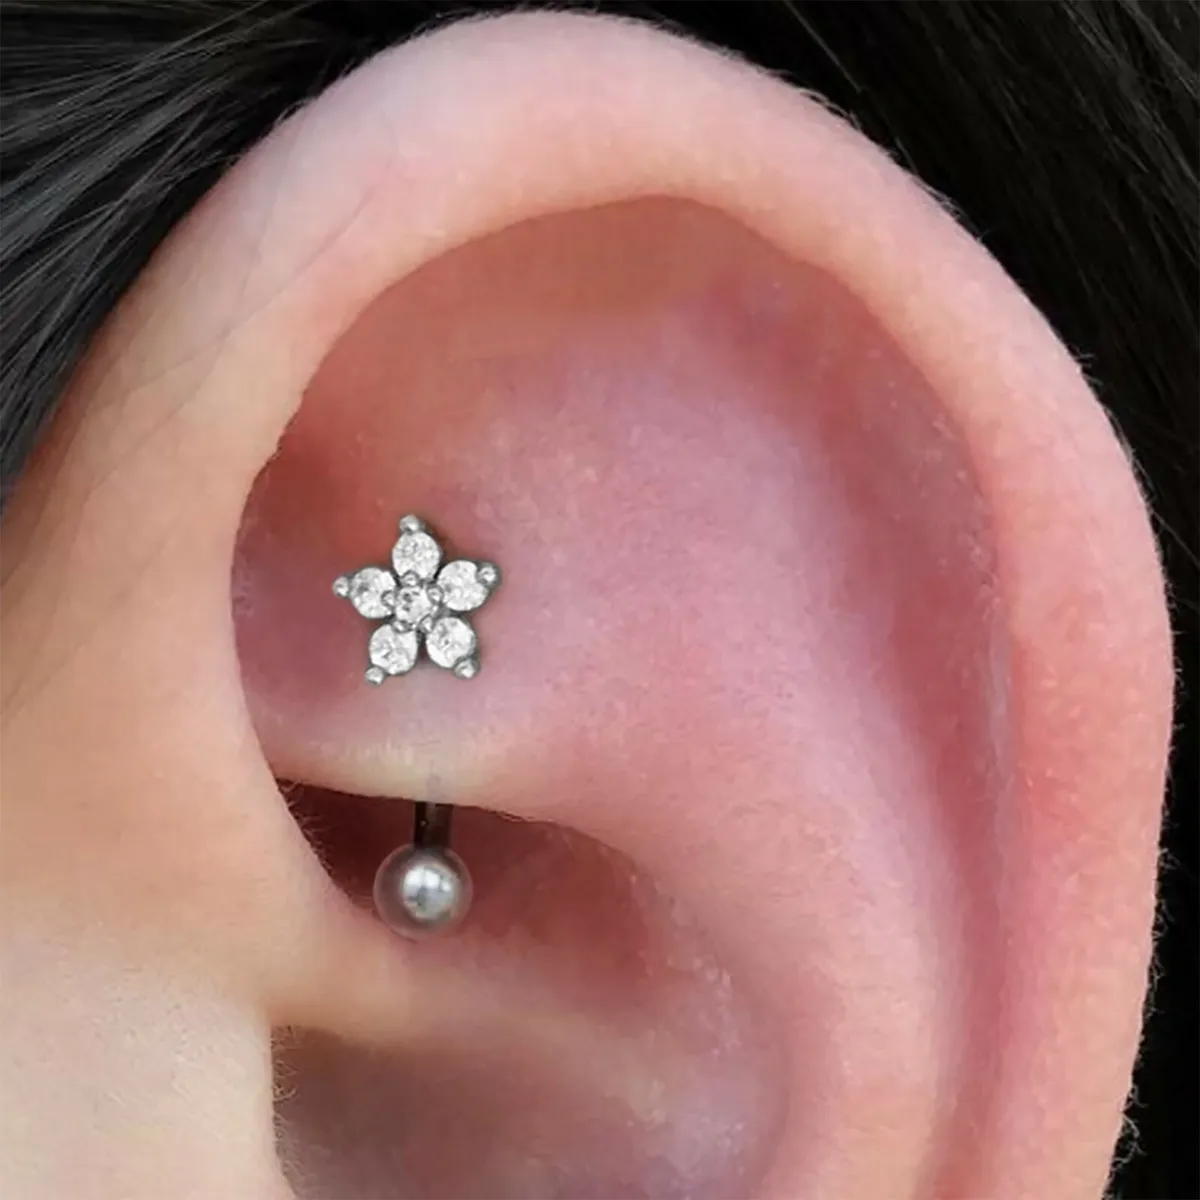 Full picture of the ear lobe wearing the ring